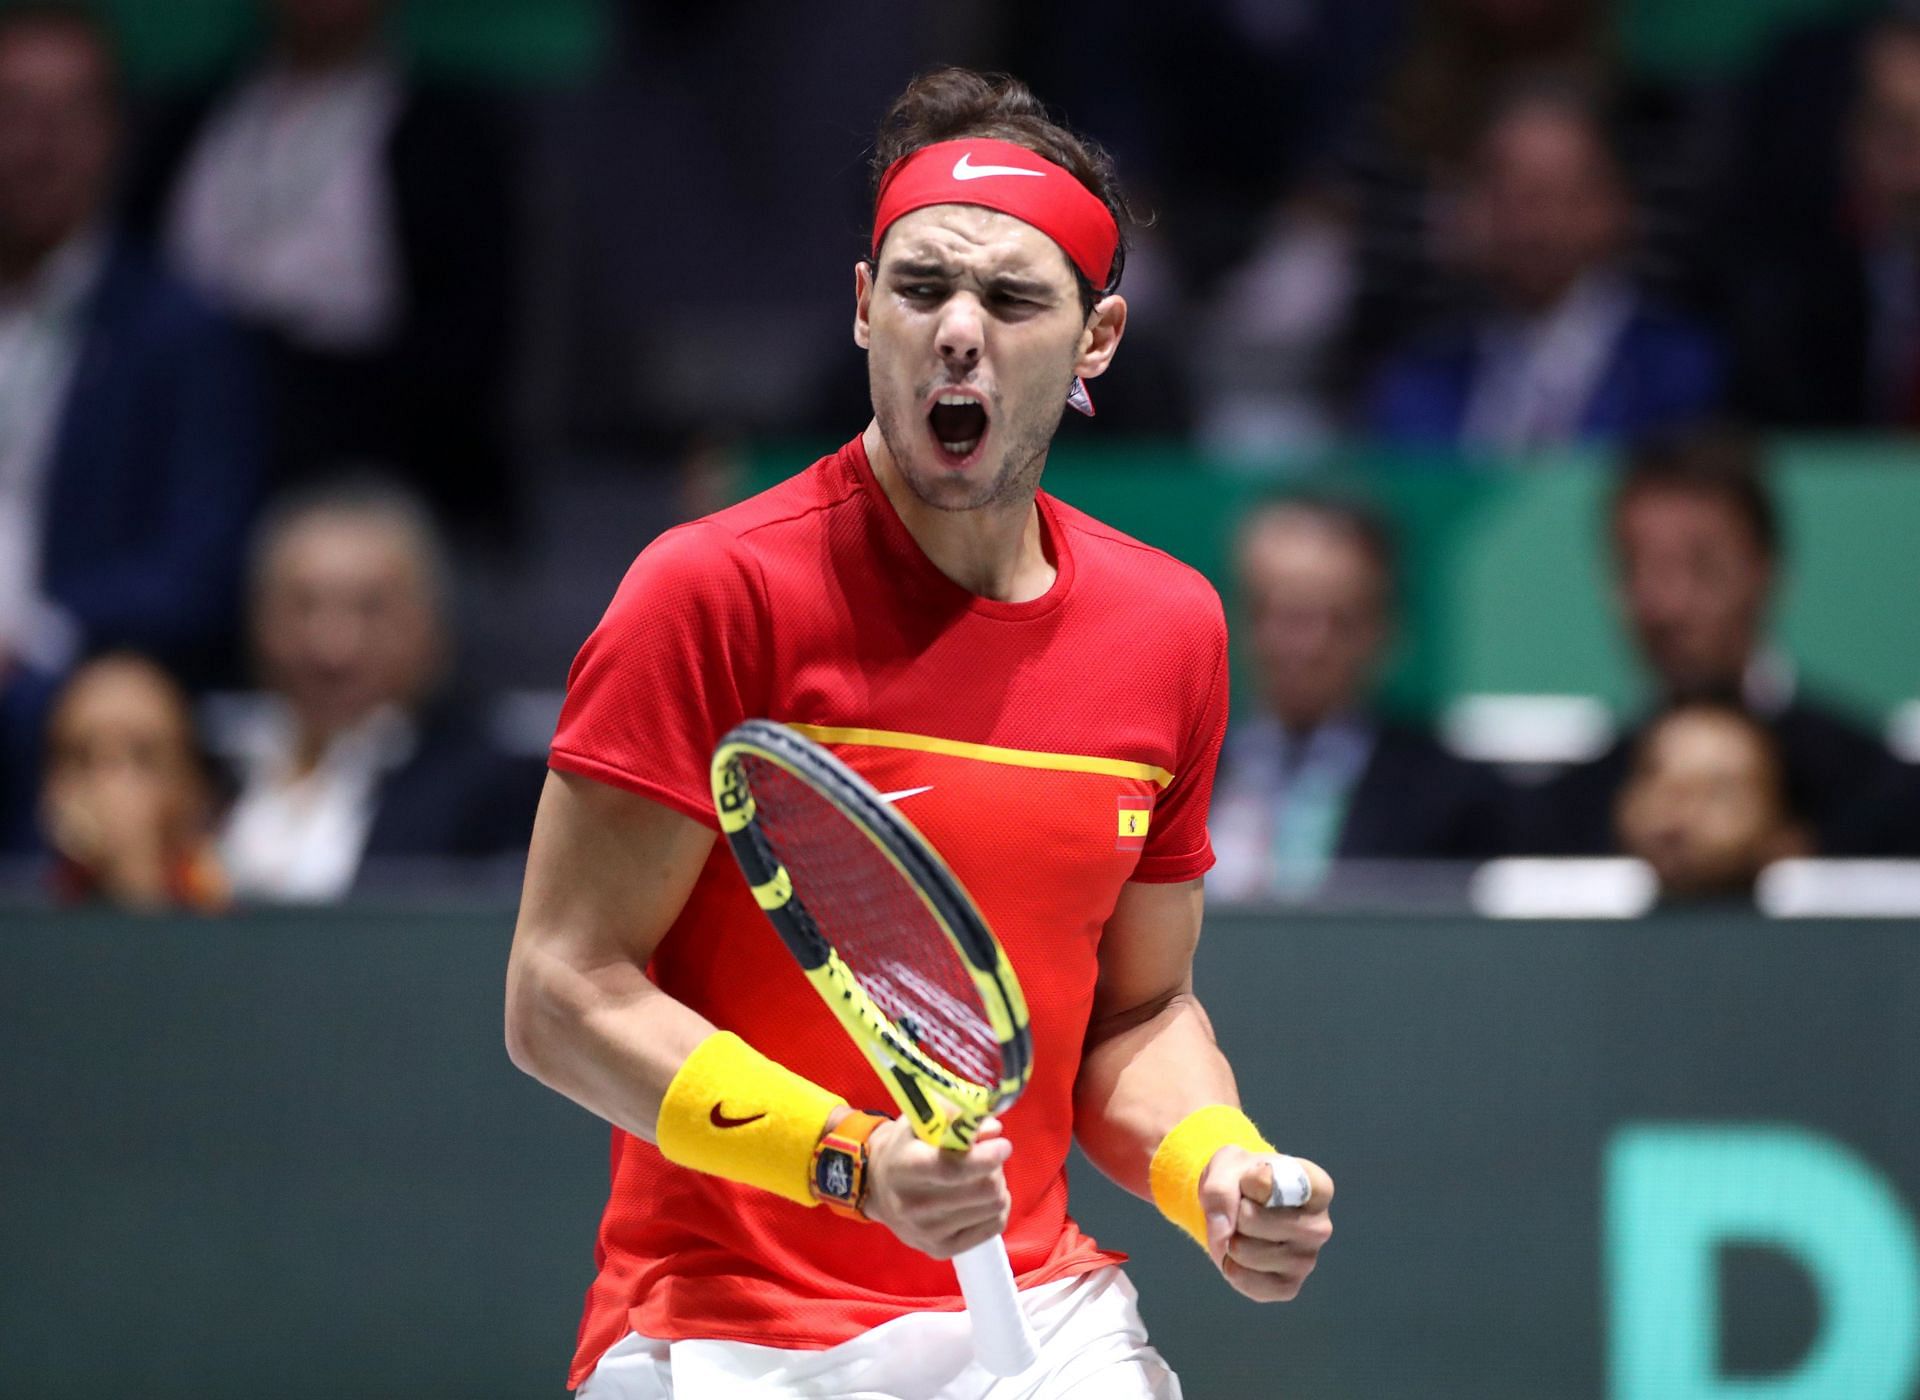 The 22-time Grand Slam champion last played at the Davis Cup in 2019.